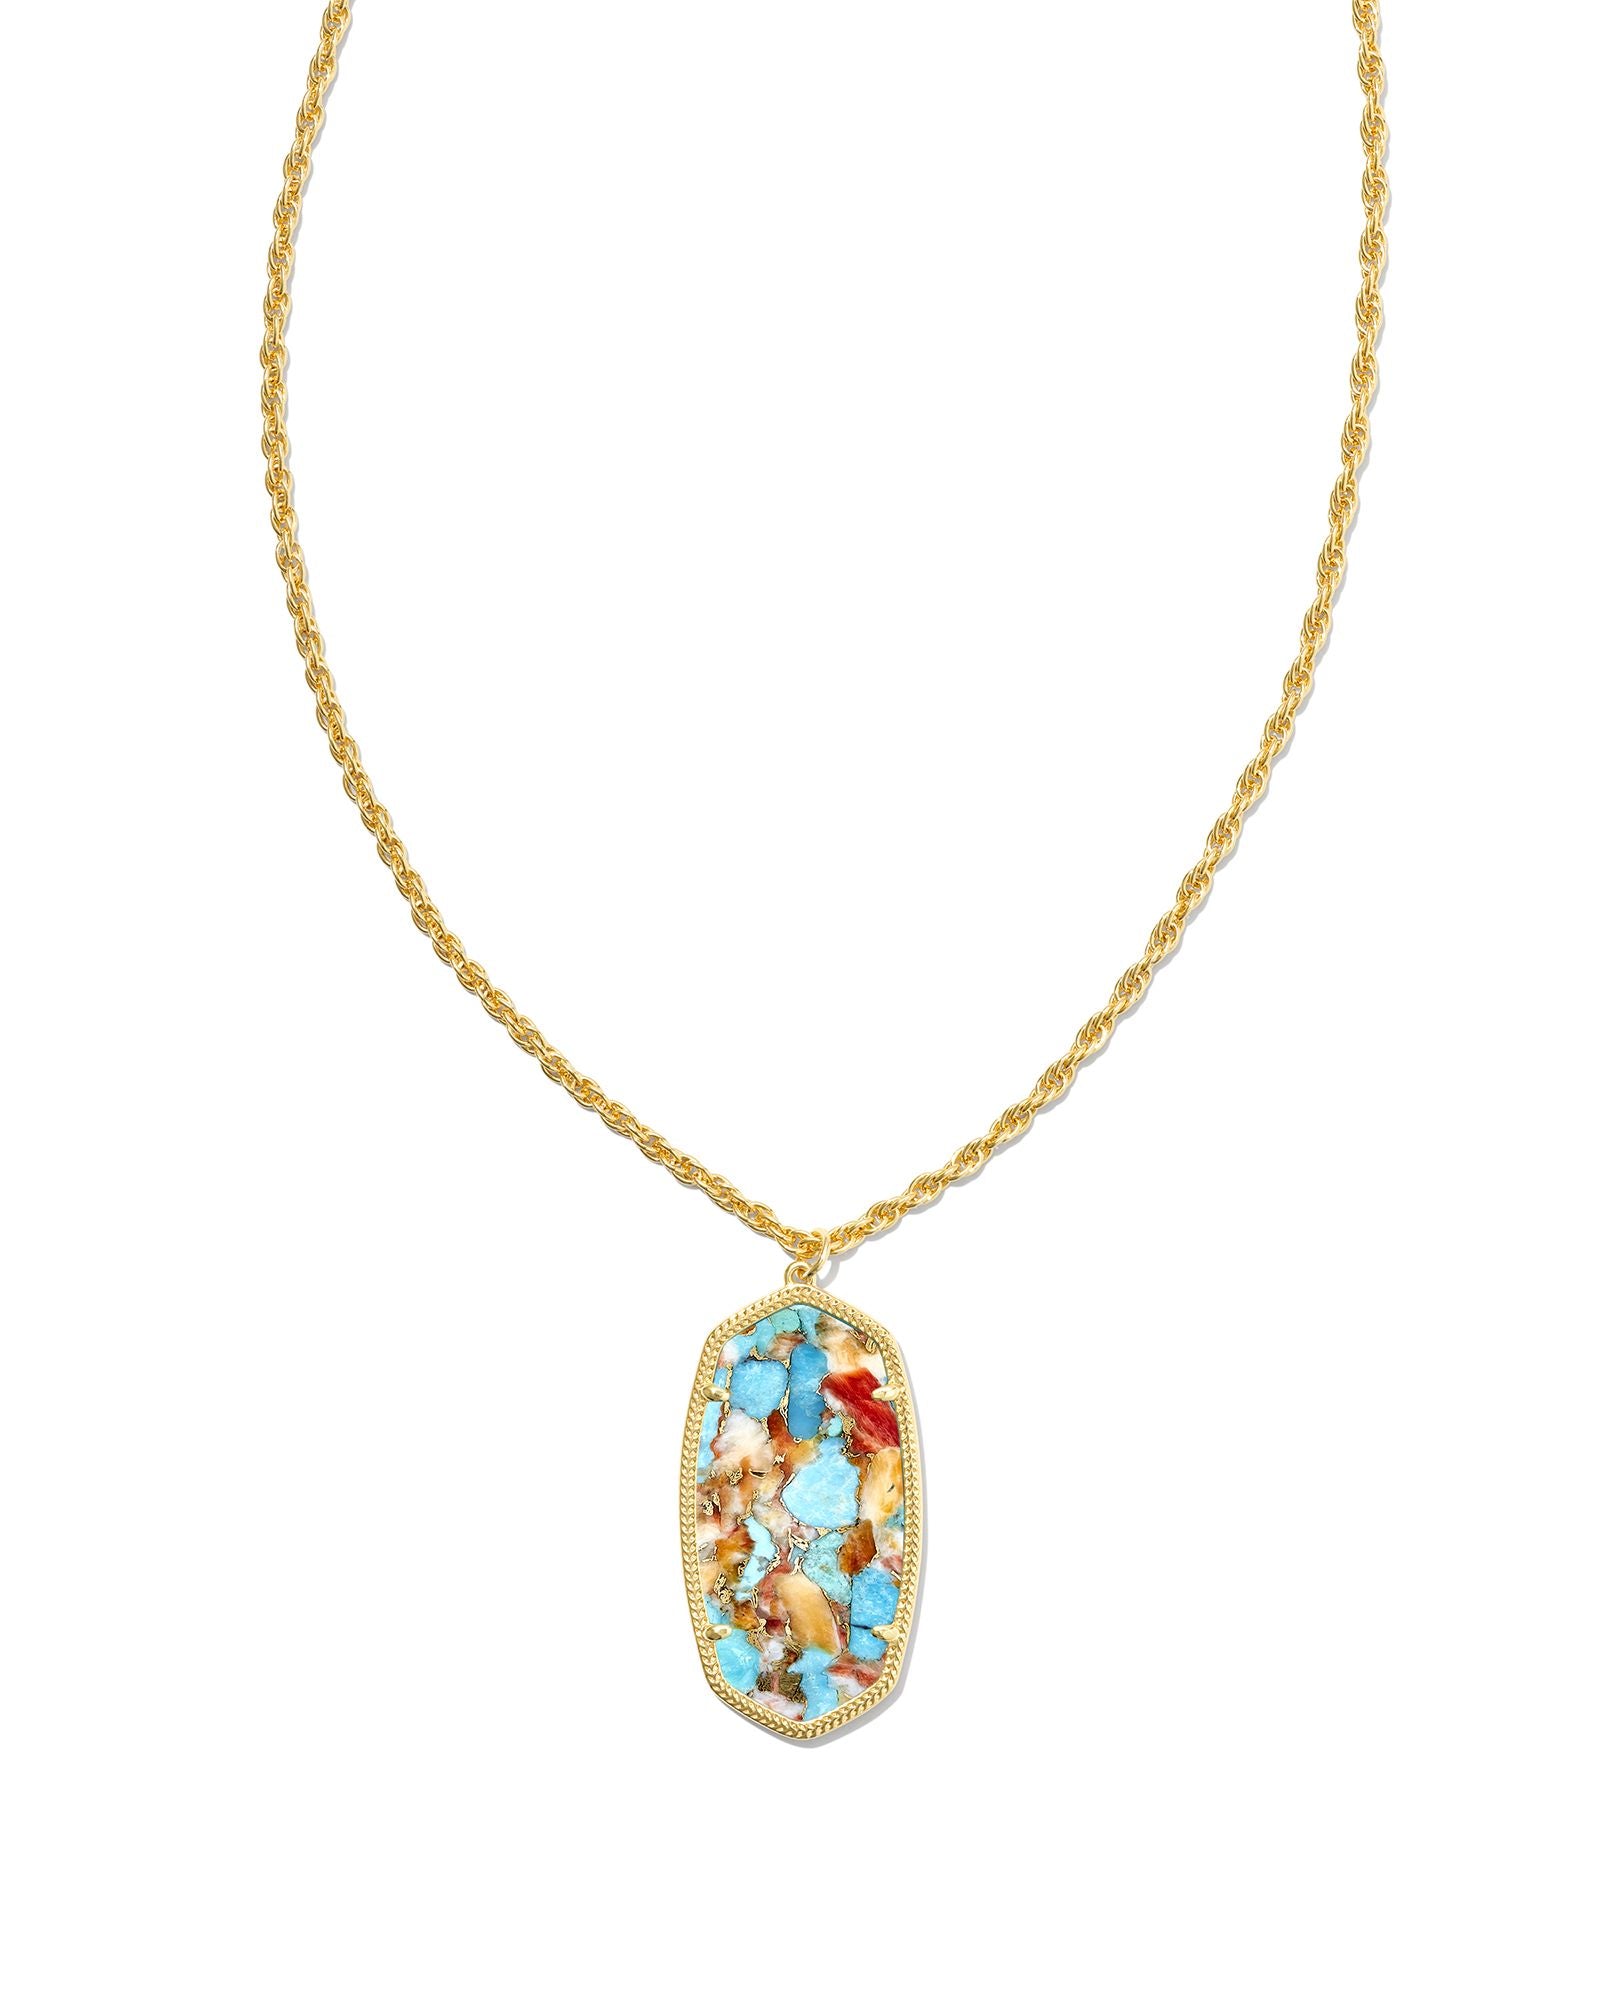 Rae Long Pendant Necklace in Gold Bronze Turquoise Magnesite Red Oyster